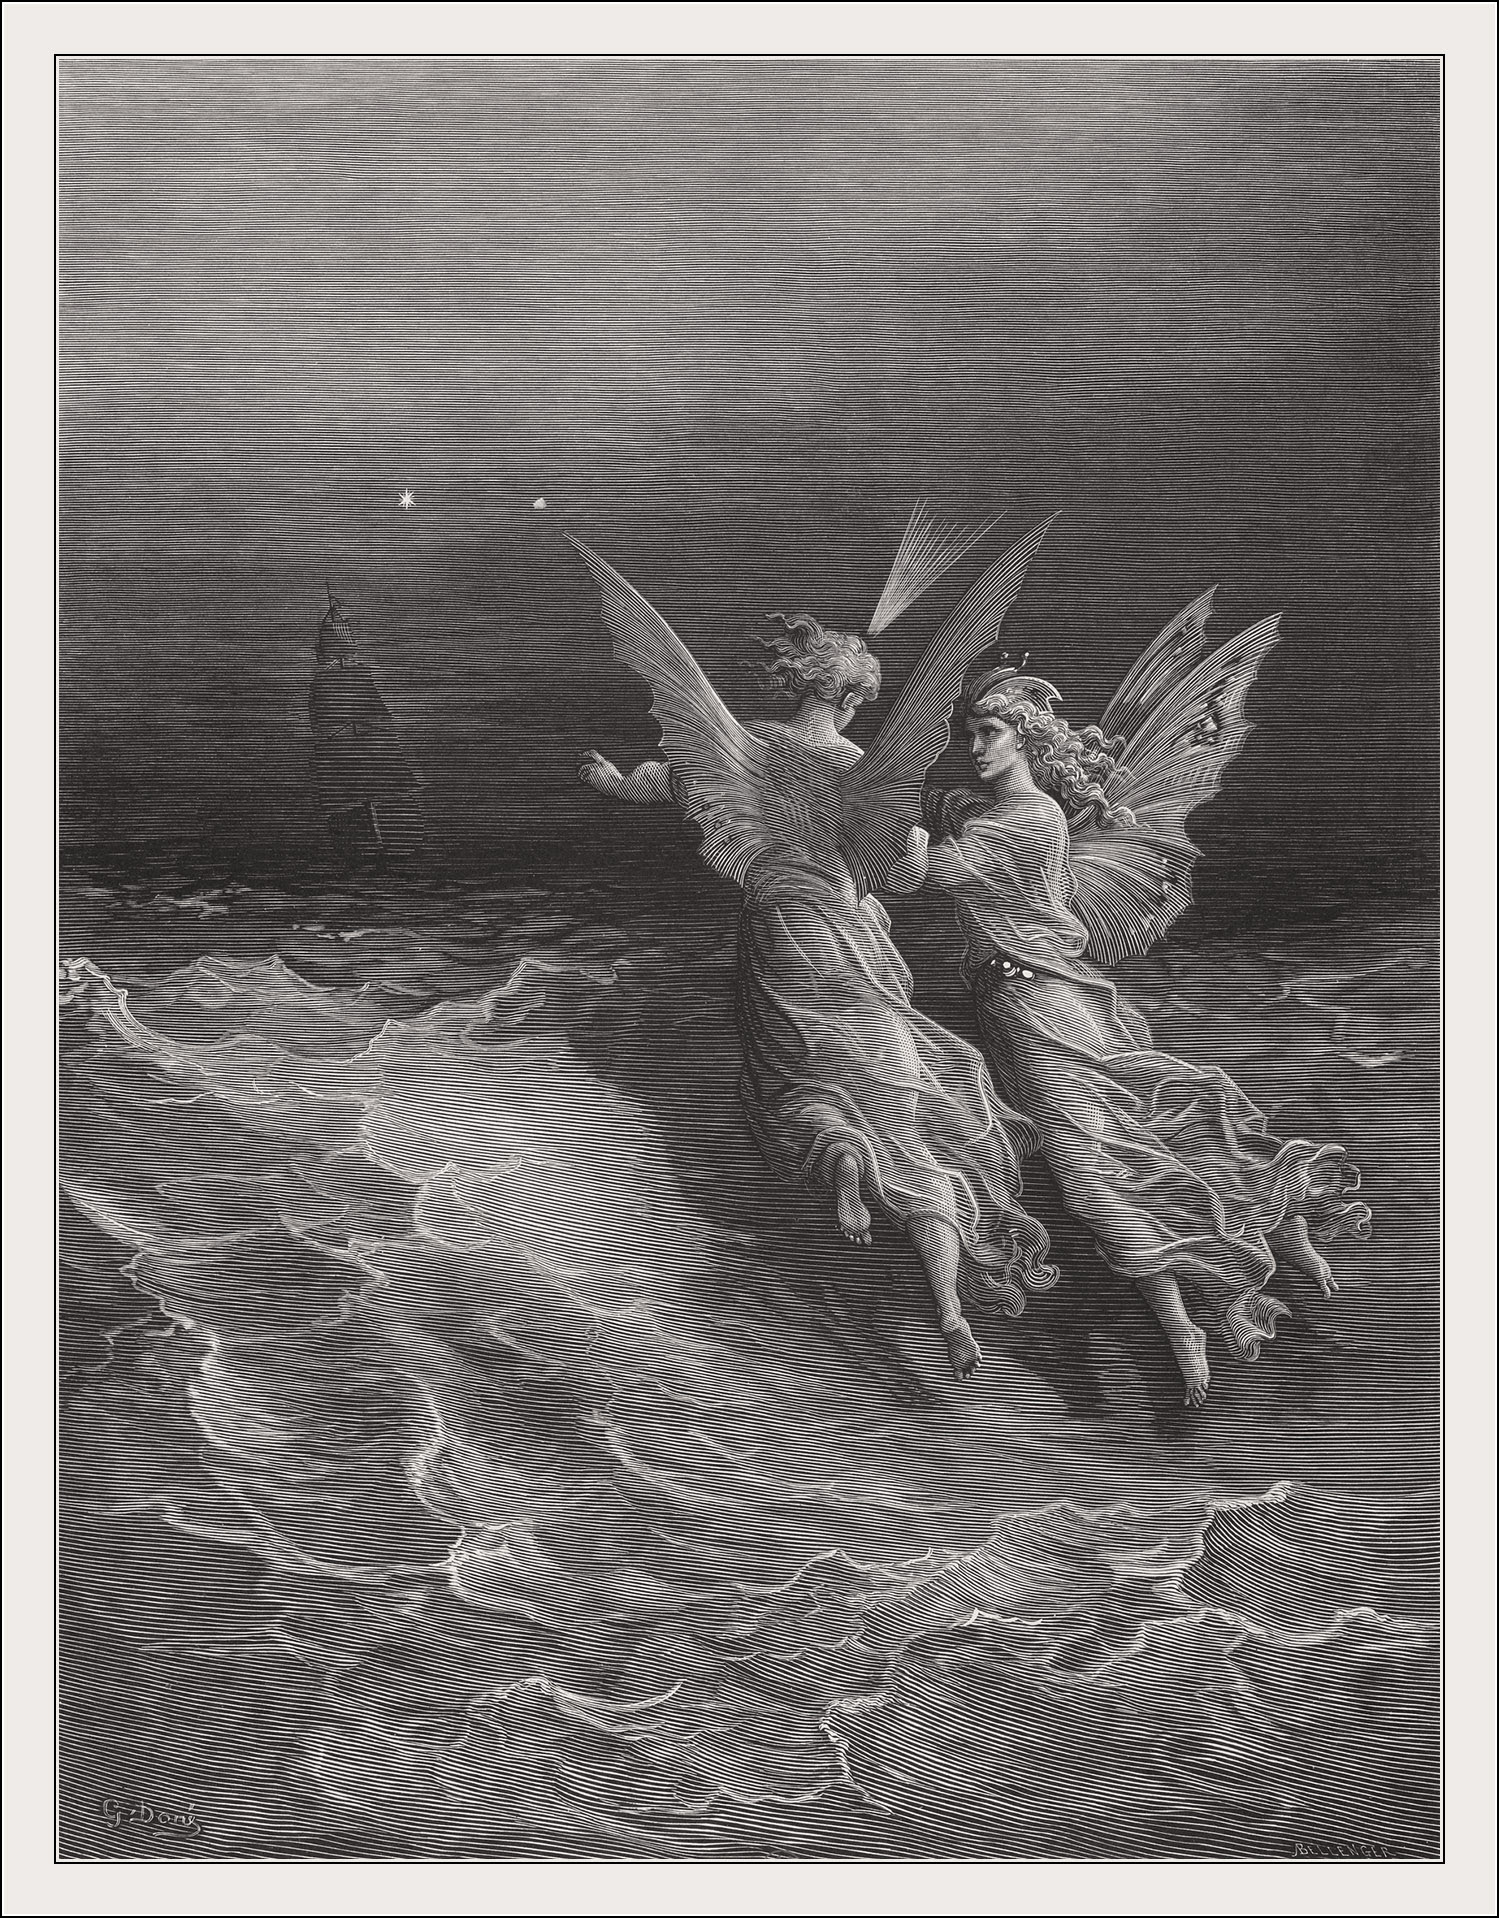 Gustave Doré, Rime of the ancient mariner